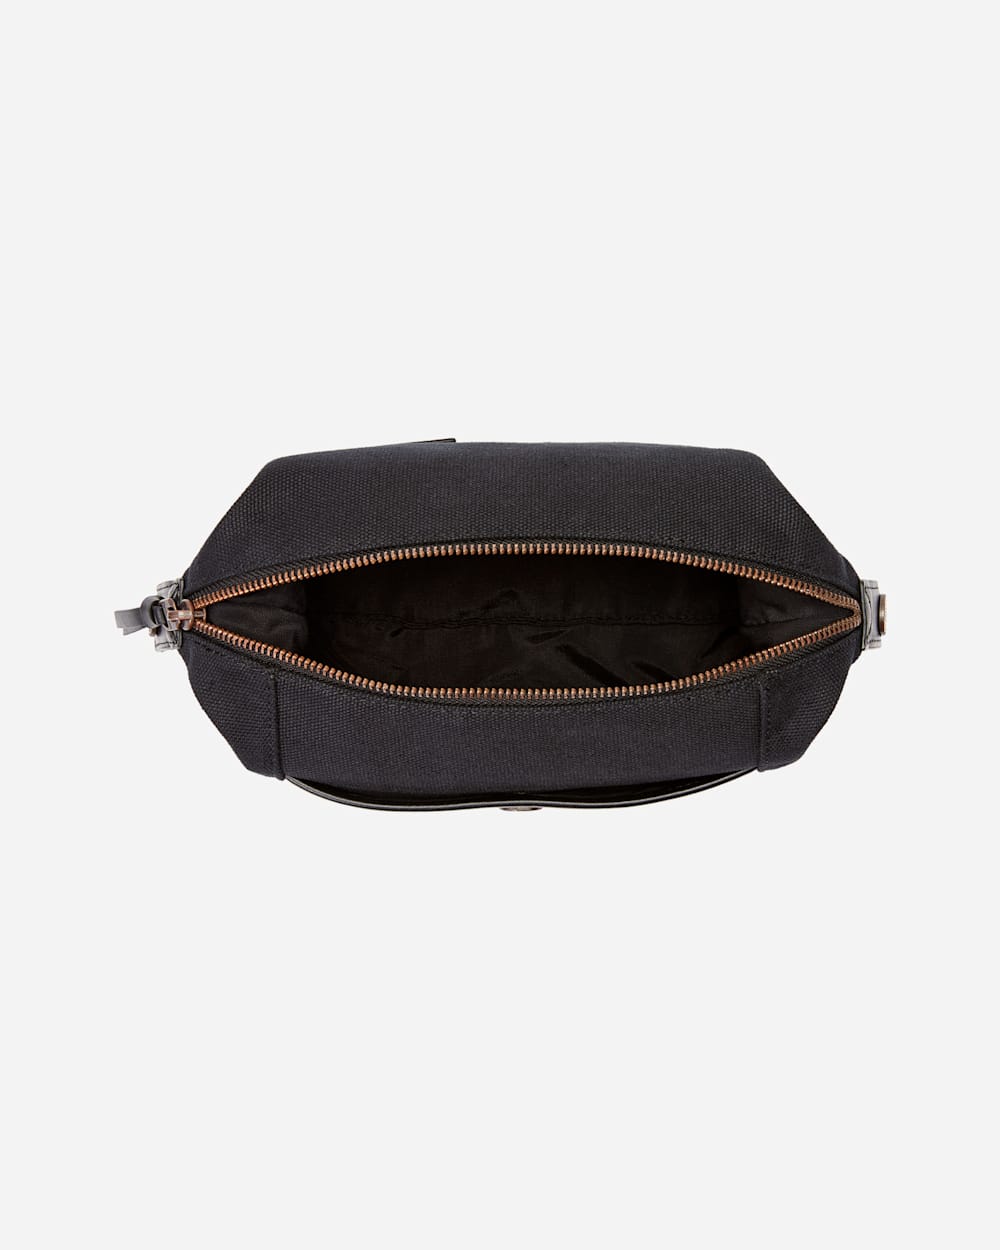 ALTERNATE VIEW OF SONORA TRAVEL POUCH IN BLACK image number 3